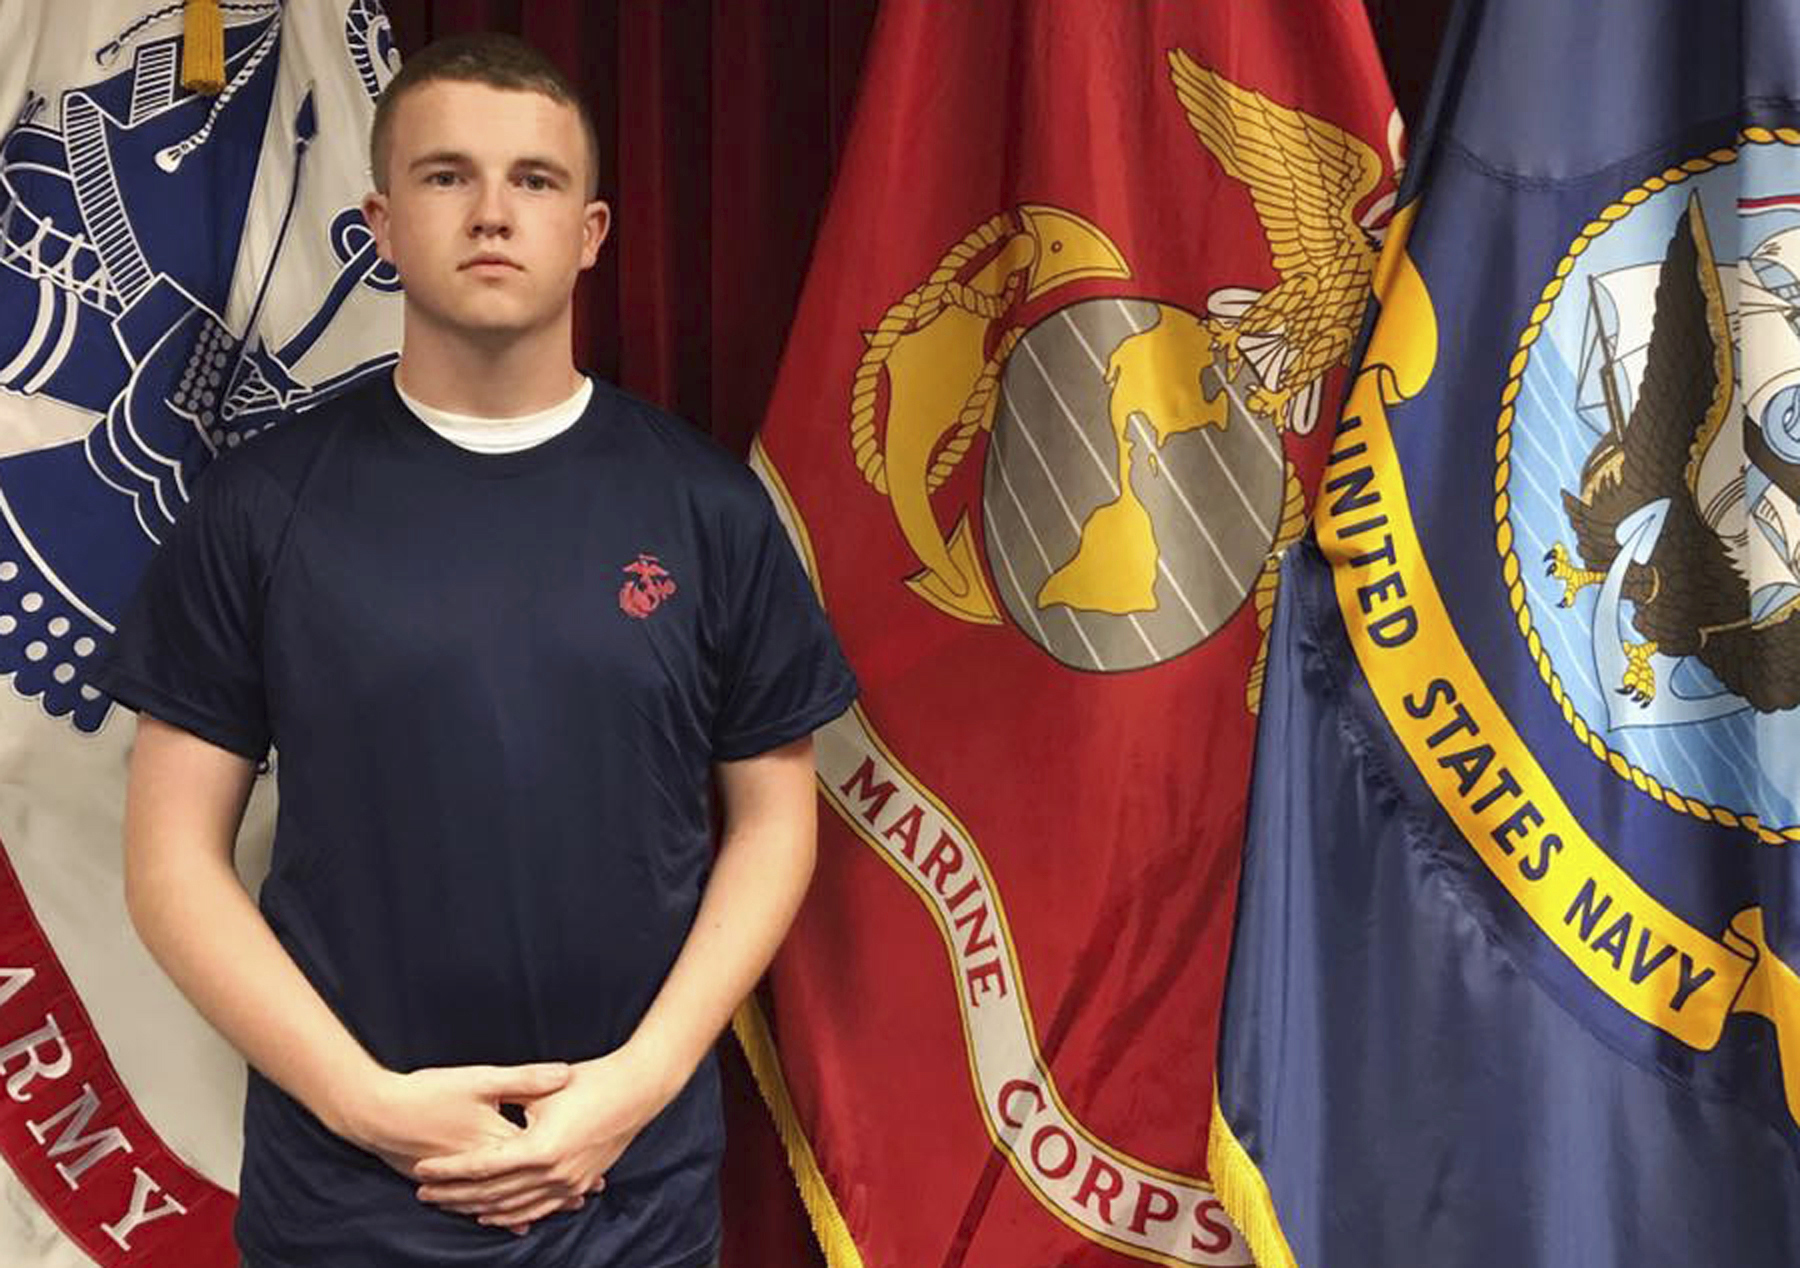 PHOTO: Tyler Jarrell, 18, poses for a photo, in this undated photo provided by the U.S. Marine Corps.